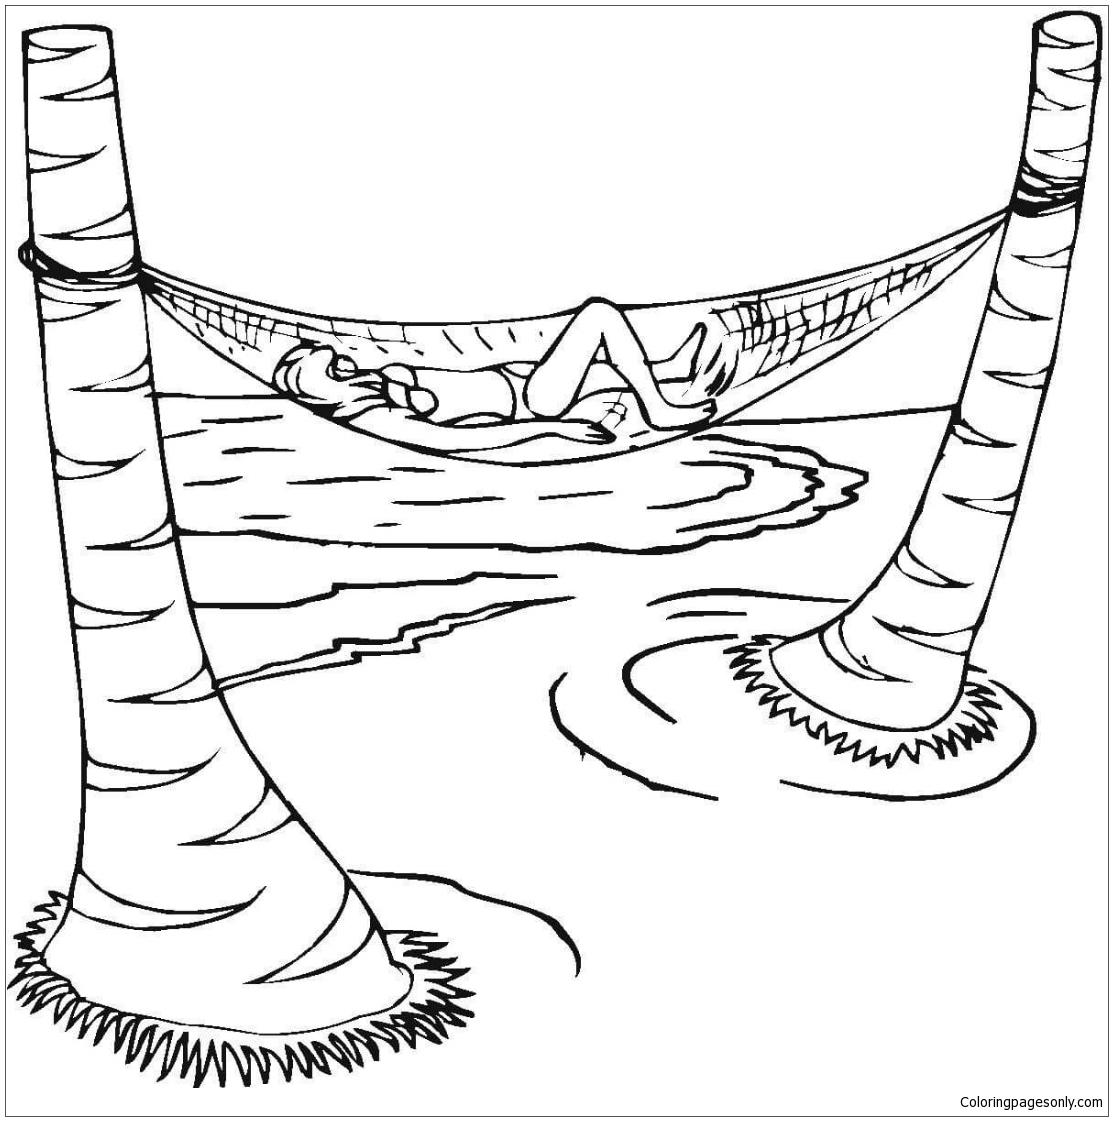 Download Summer Vacation With A Hammock Coloring Page - Free Coloring Pages Online